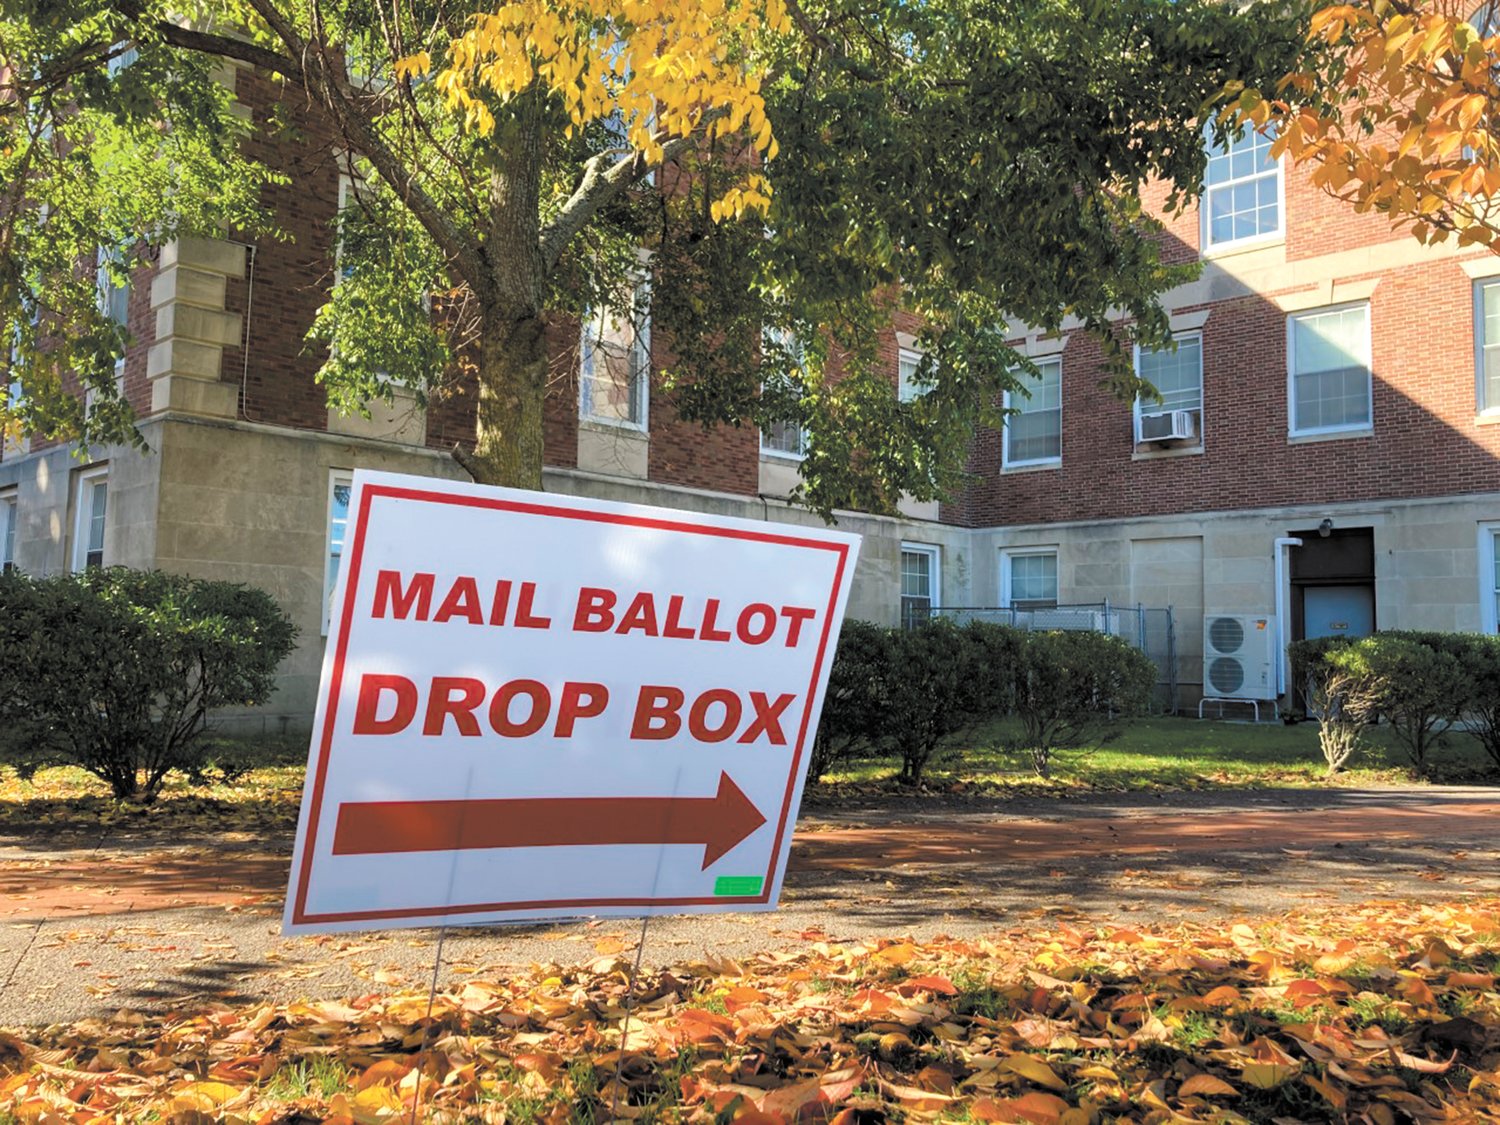 MAIL BALLOT DROP OFF: Early voting for the General Election continues until Nov. 7 at the Peter T. Pastore Youth Center. Mail ballots drop boxes Cranston can be found at Cranston City Hall (869 Park Ave.) on the side entrance next to Cranston East and the RI Board of Elections (2000 Plainfield Pike). (Herald photo)